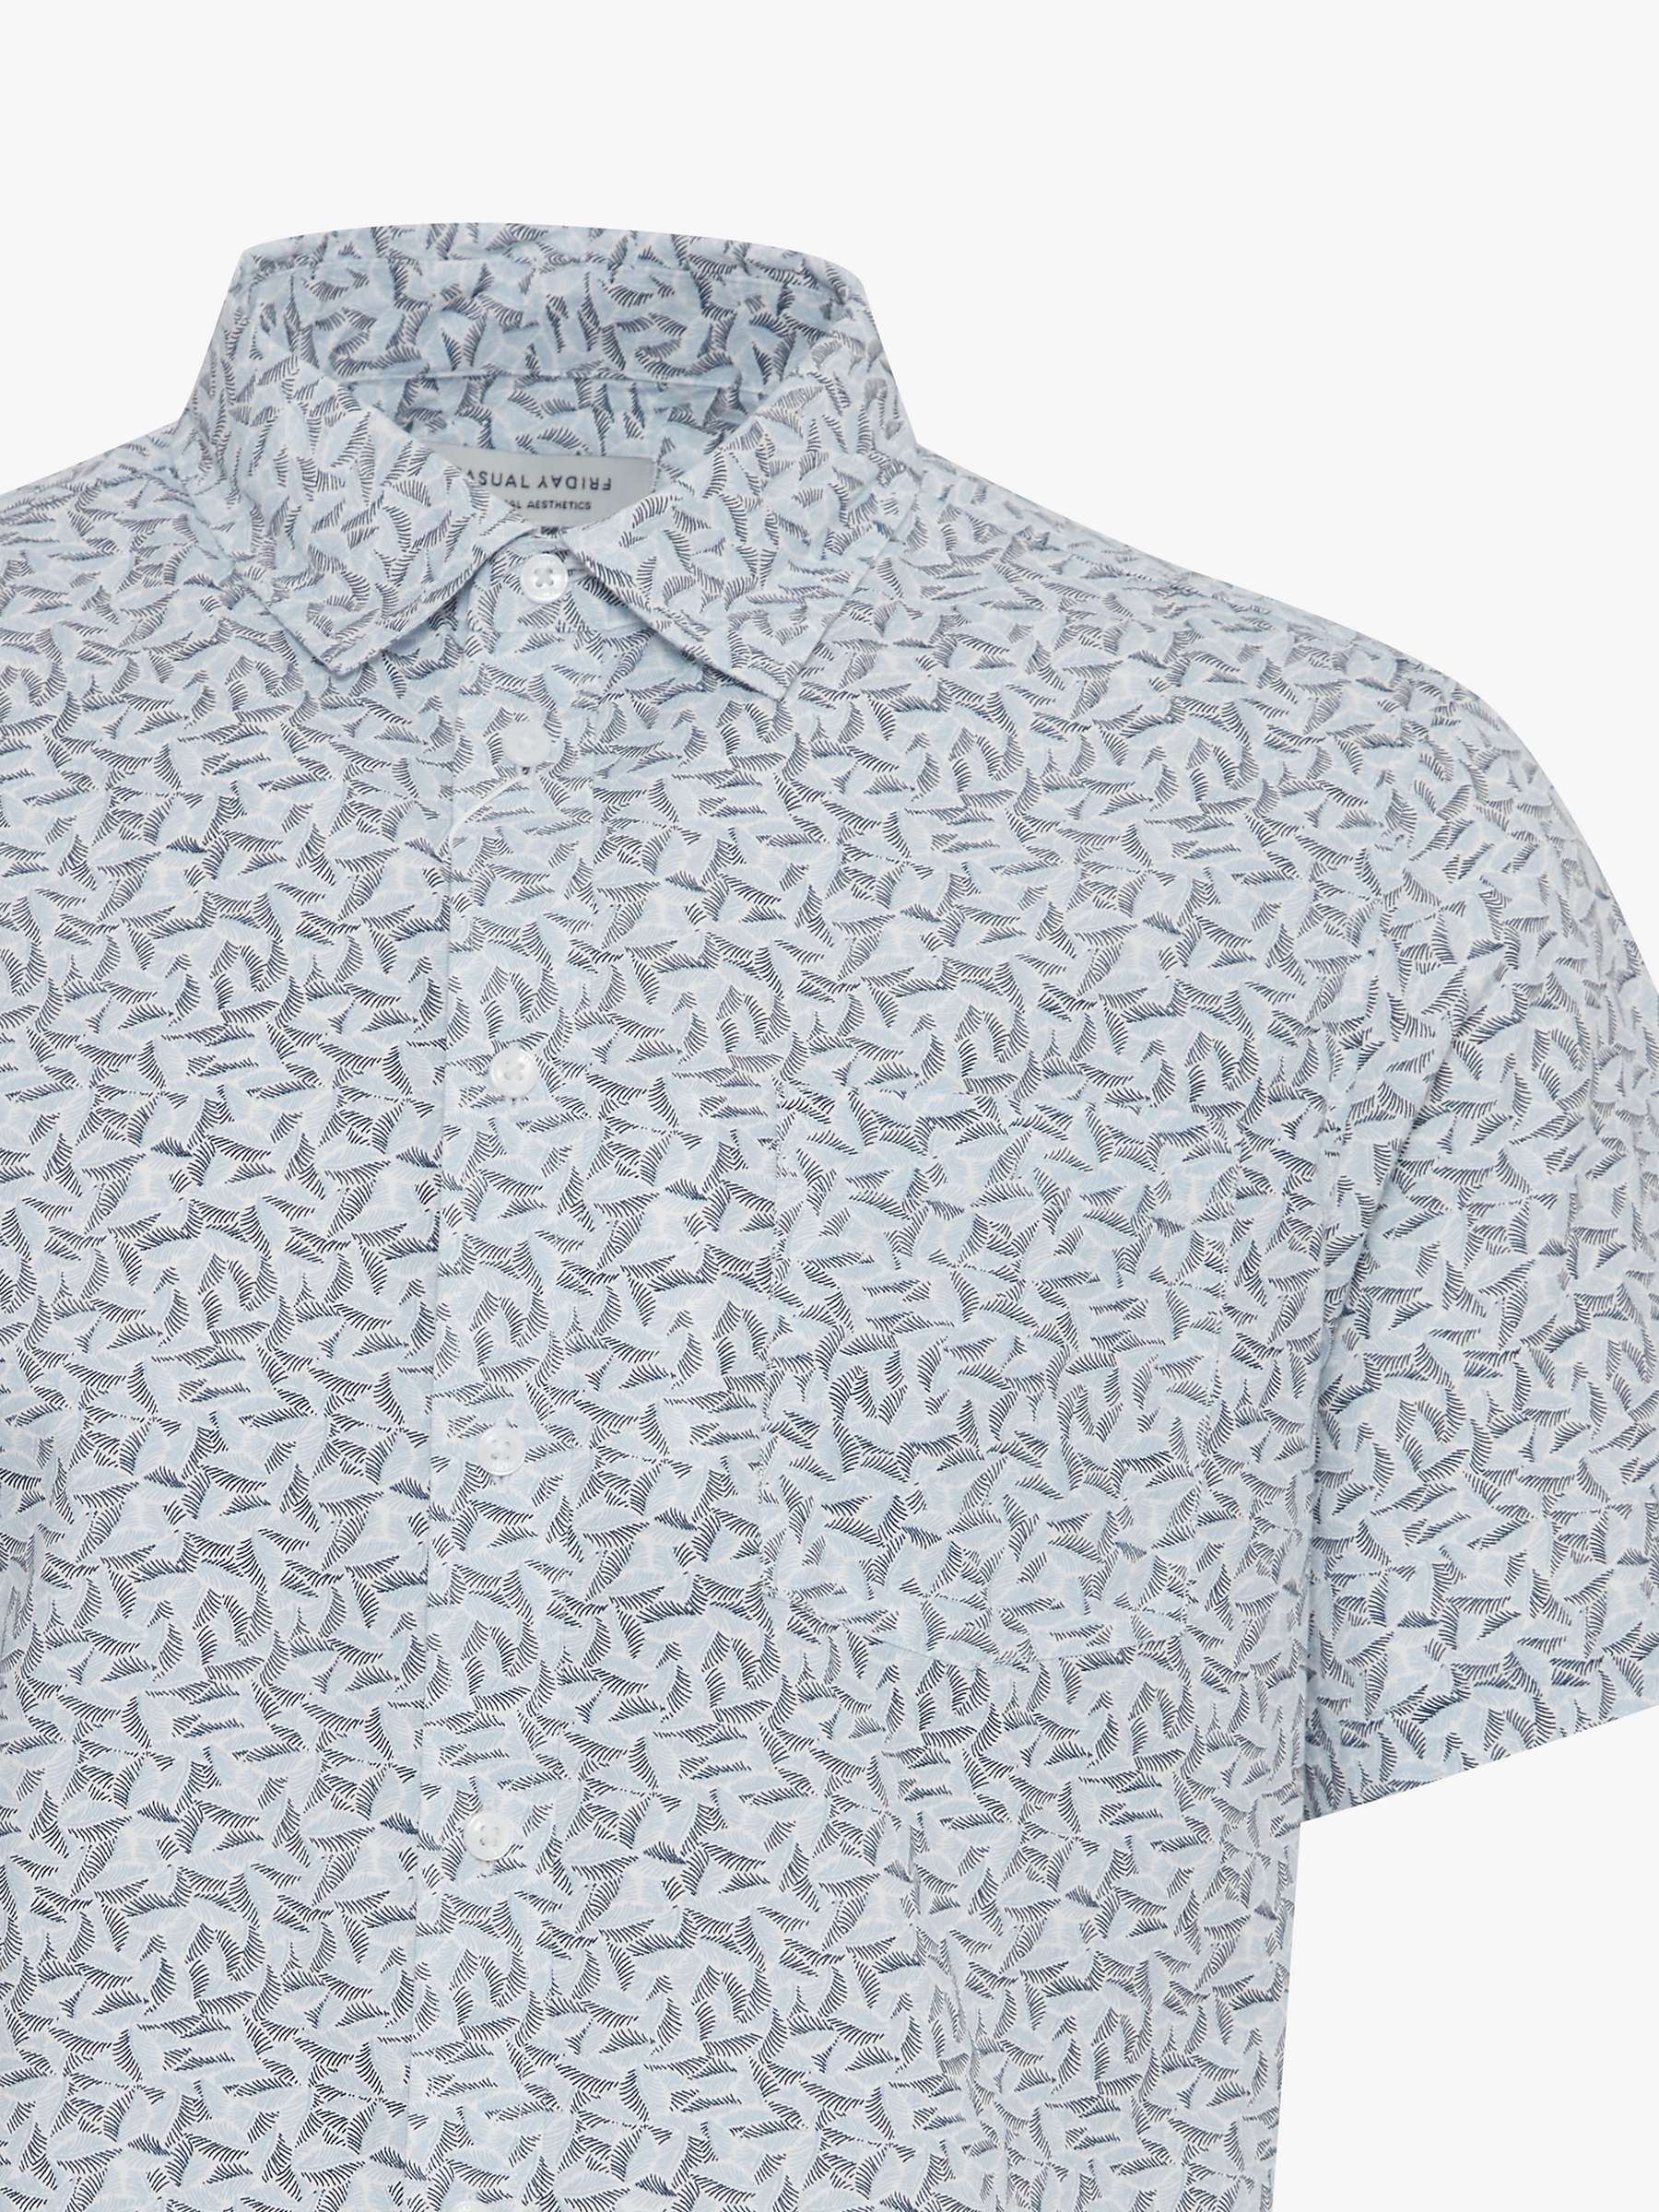 Buy Casual Friday Anton Short Sleeve Leaf Printed Shirt, Chambray Blue Online at johnlewis.com